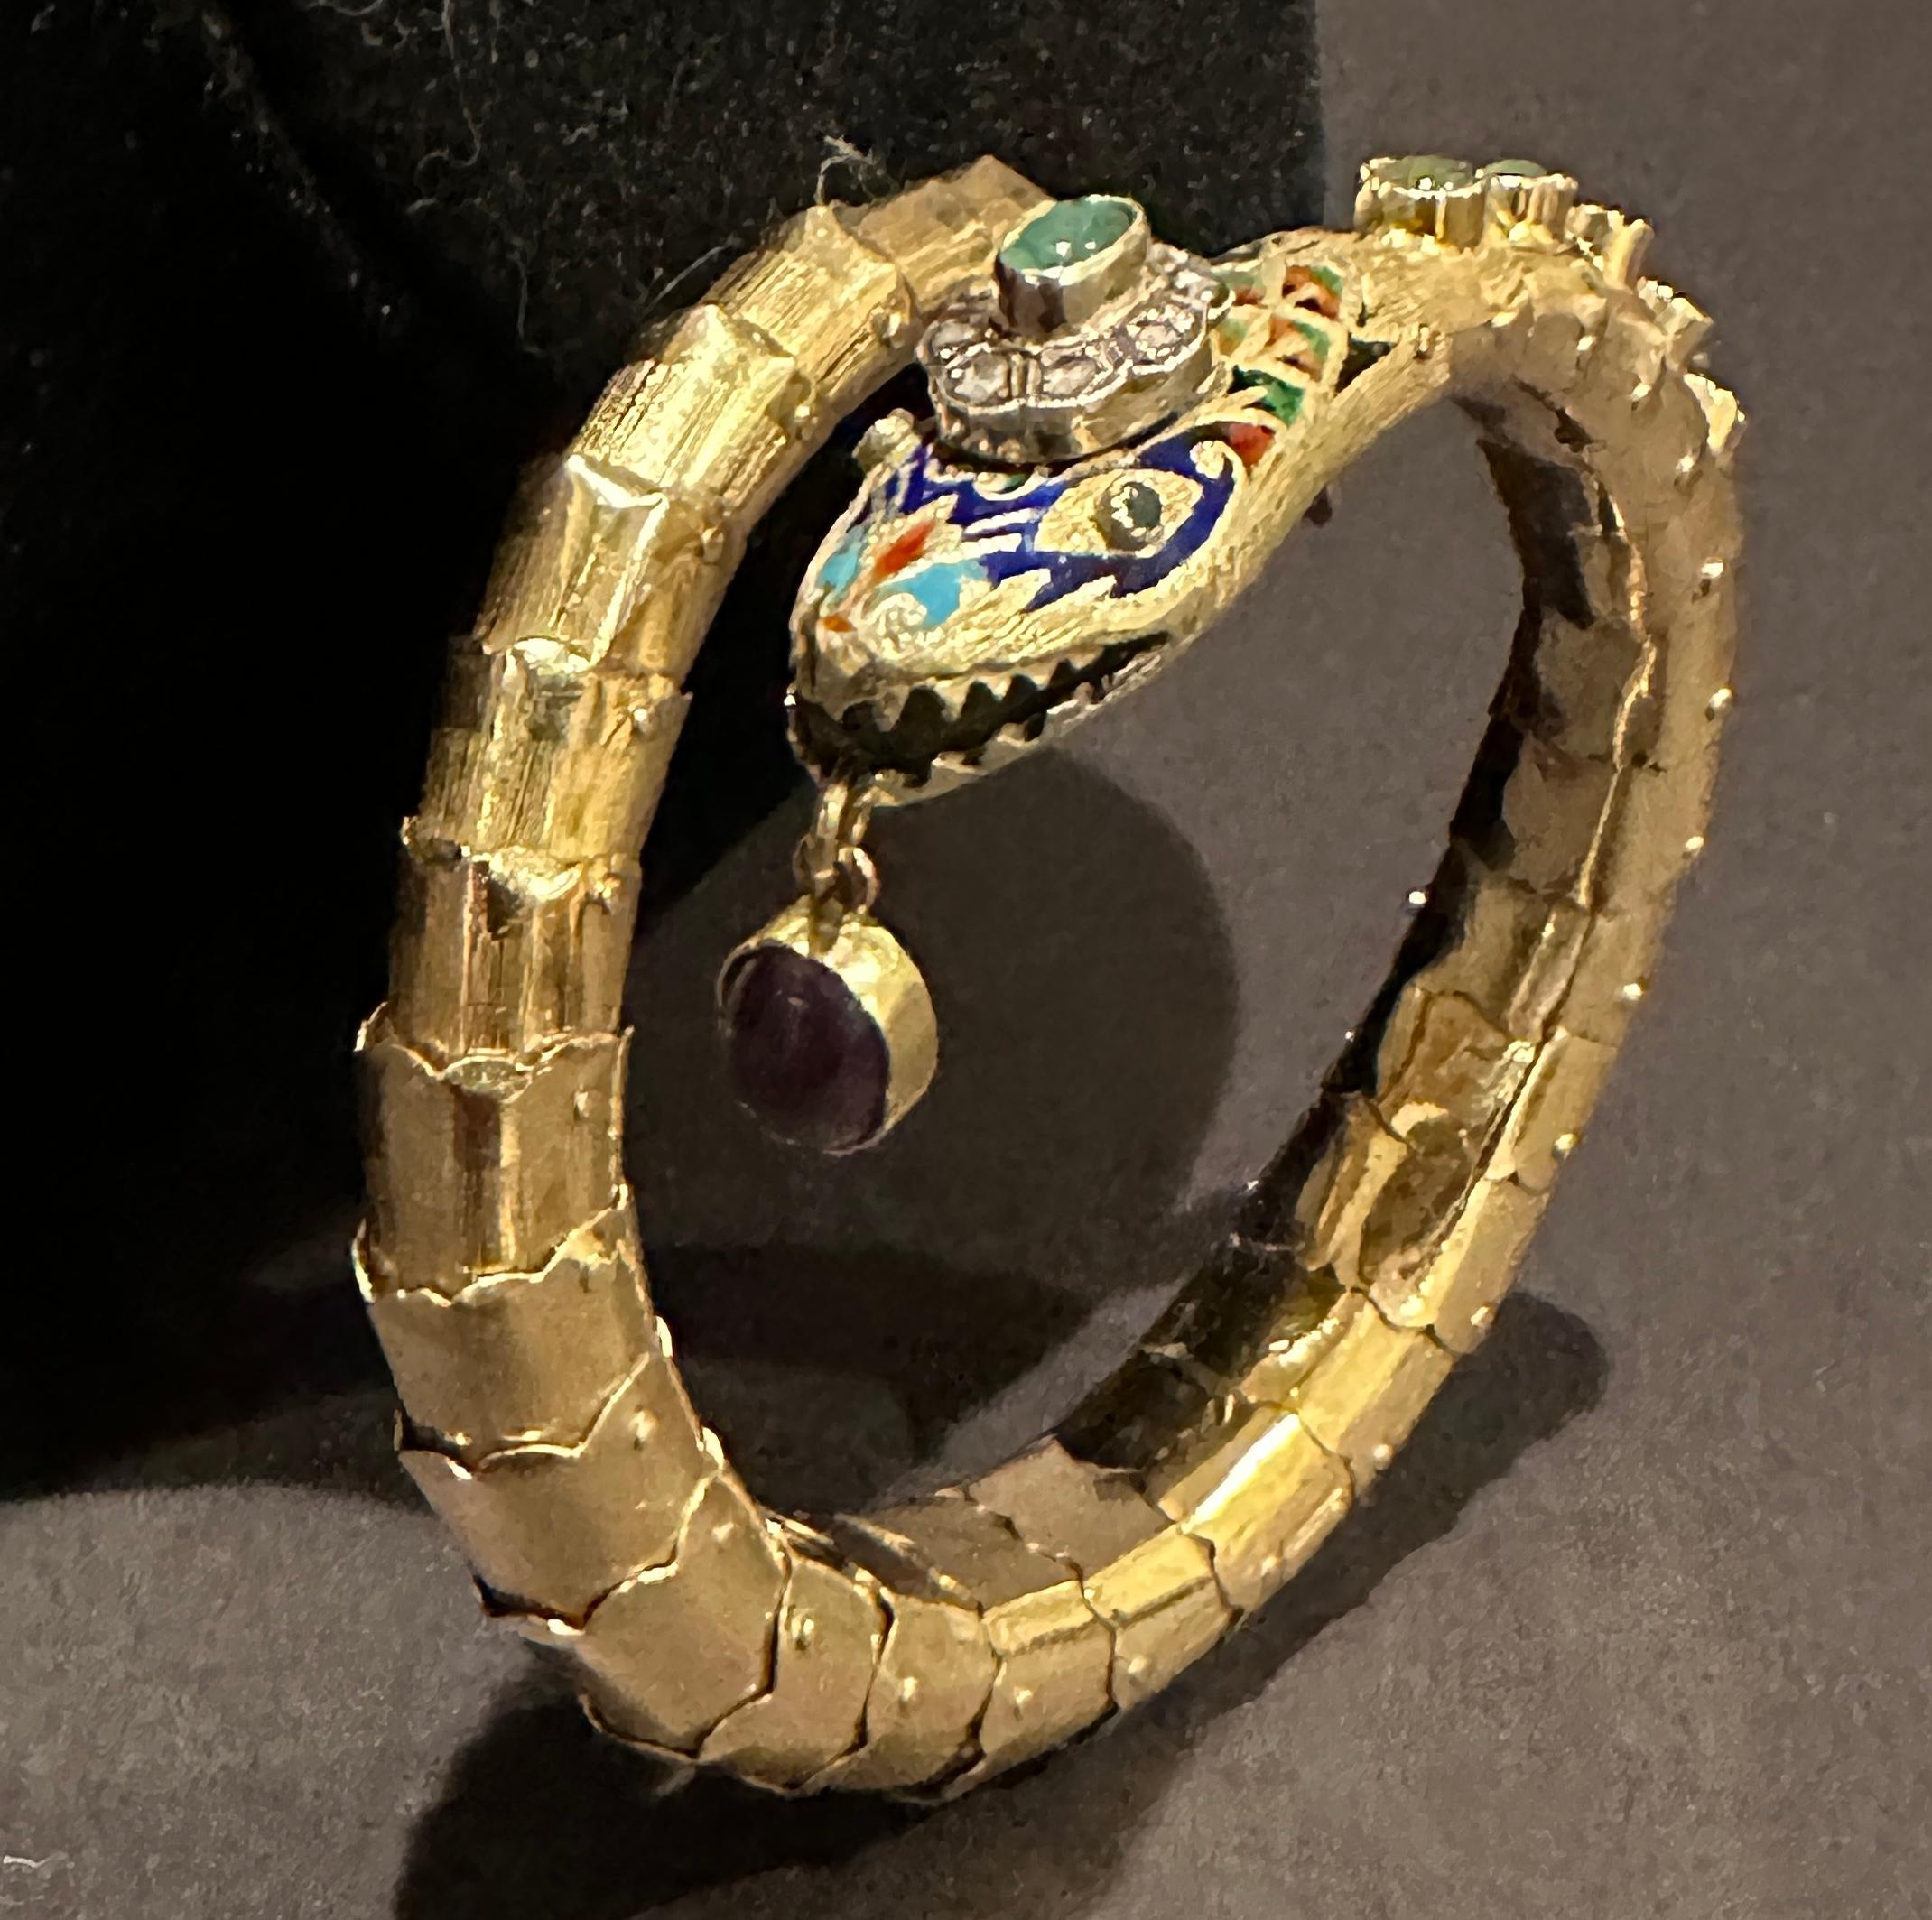 Art Deco 14k gold, diamond, Jade and amethyst enameled and  articulated bracelet in the form of a snake. 8 rose cut diamonds. Jade and amethyst cabochons  with multicolored enamel. 40.3 grams total weight. Minor area of interior spring protrusion at